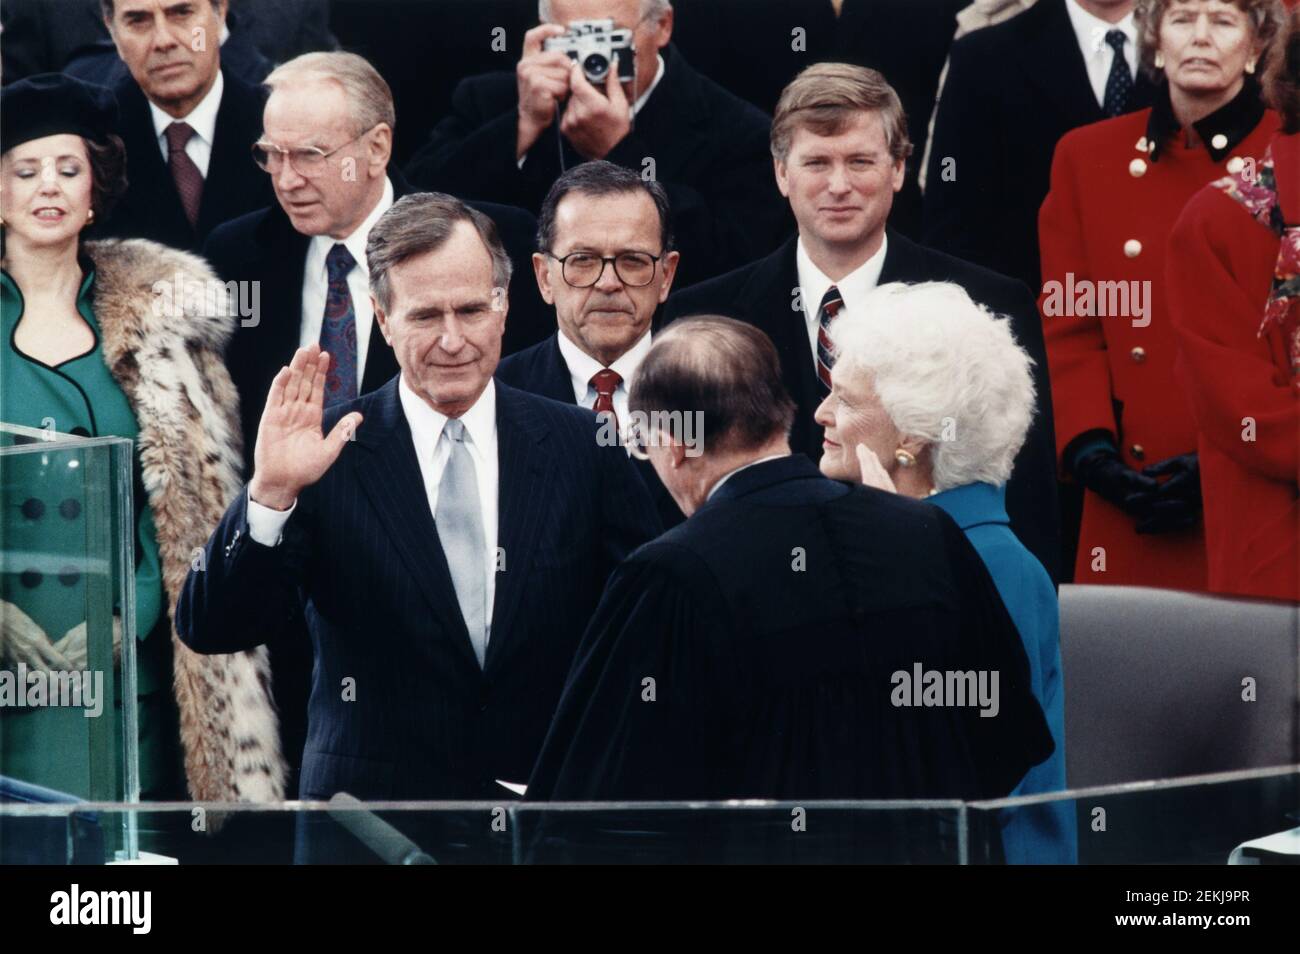 Chief Justice William Rehnquist administering Oath of Office to George Bush on west front of U.S. Capitol, with Dan Quayle and Barbara Bush looking on, Architect of the Capitol Collection, January 20, 1989 Stock Photo